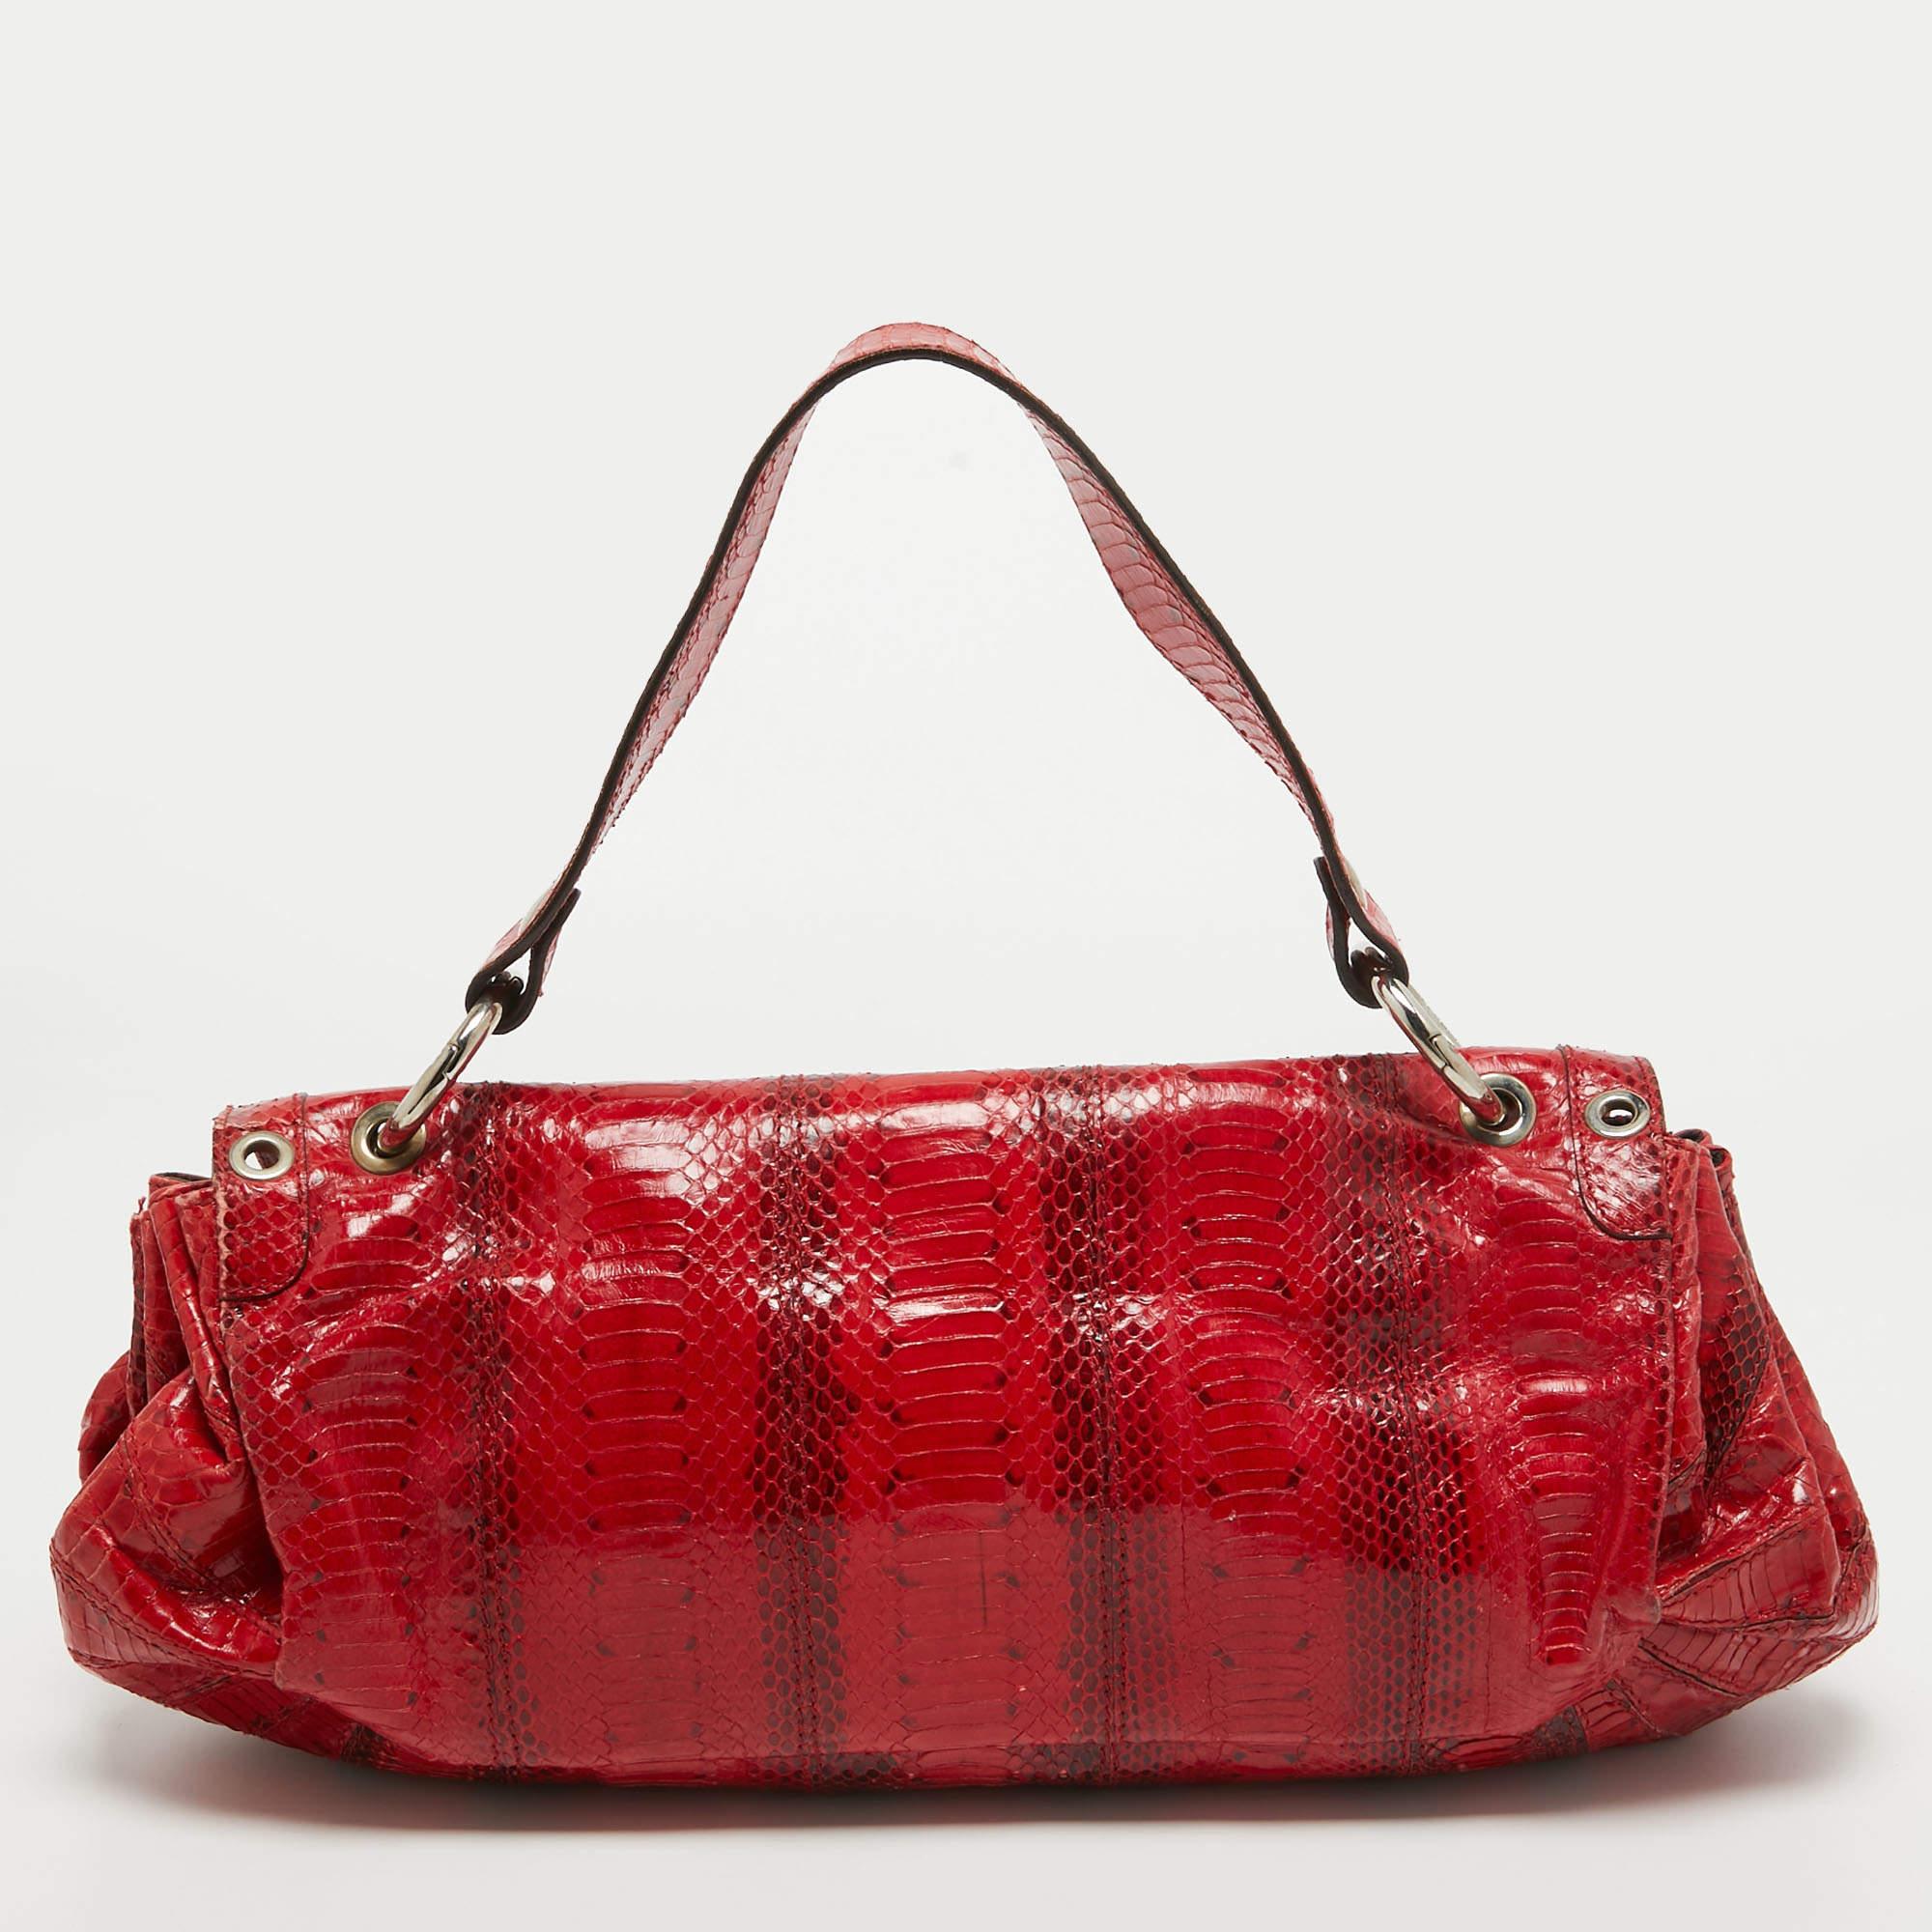 Dolce & Gabbana Red Watersnake Leather Satchel For Sale 6